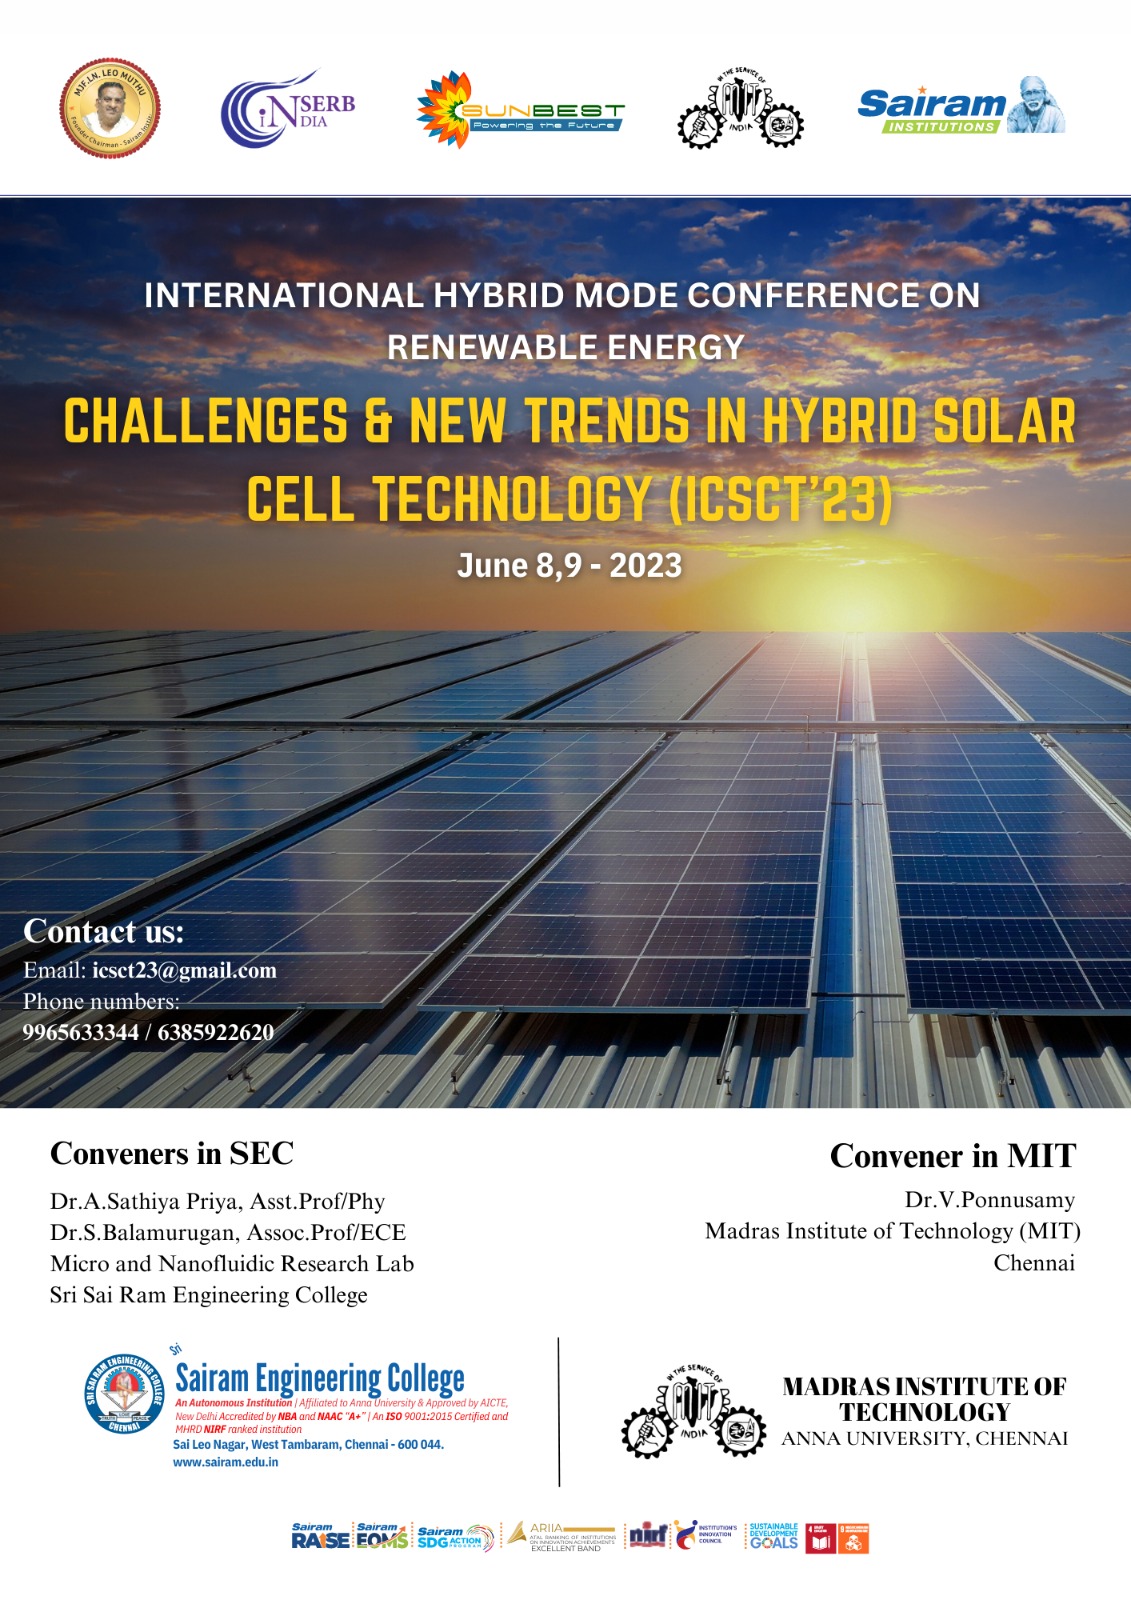 International Hybrid Mode Conference on Challenges and New Trends in Hybrid Solar Cell Technology ICSCT'23